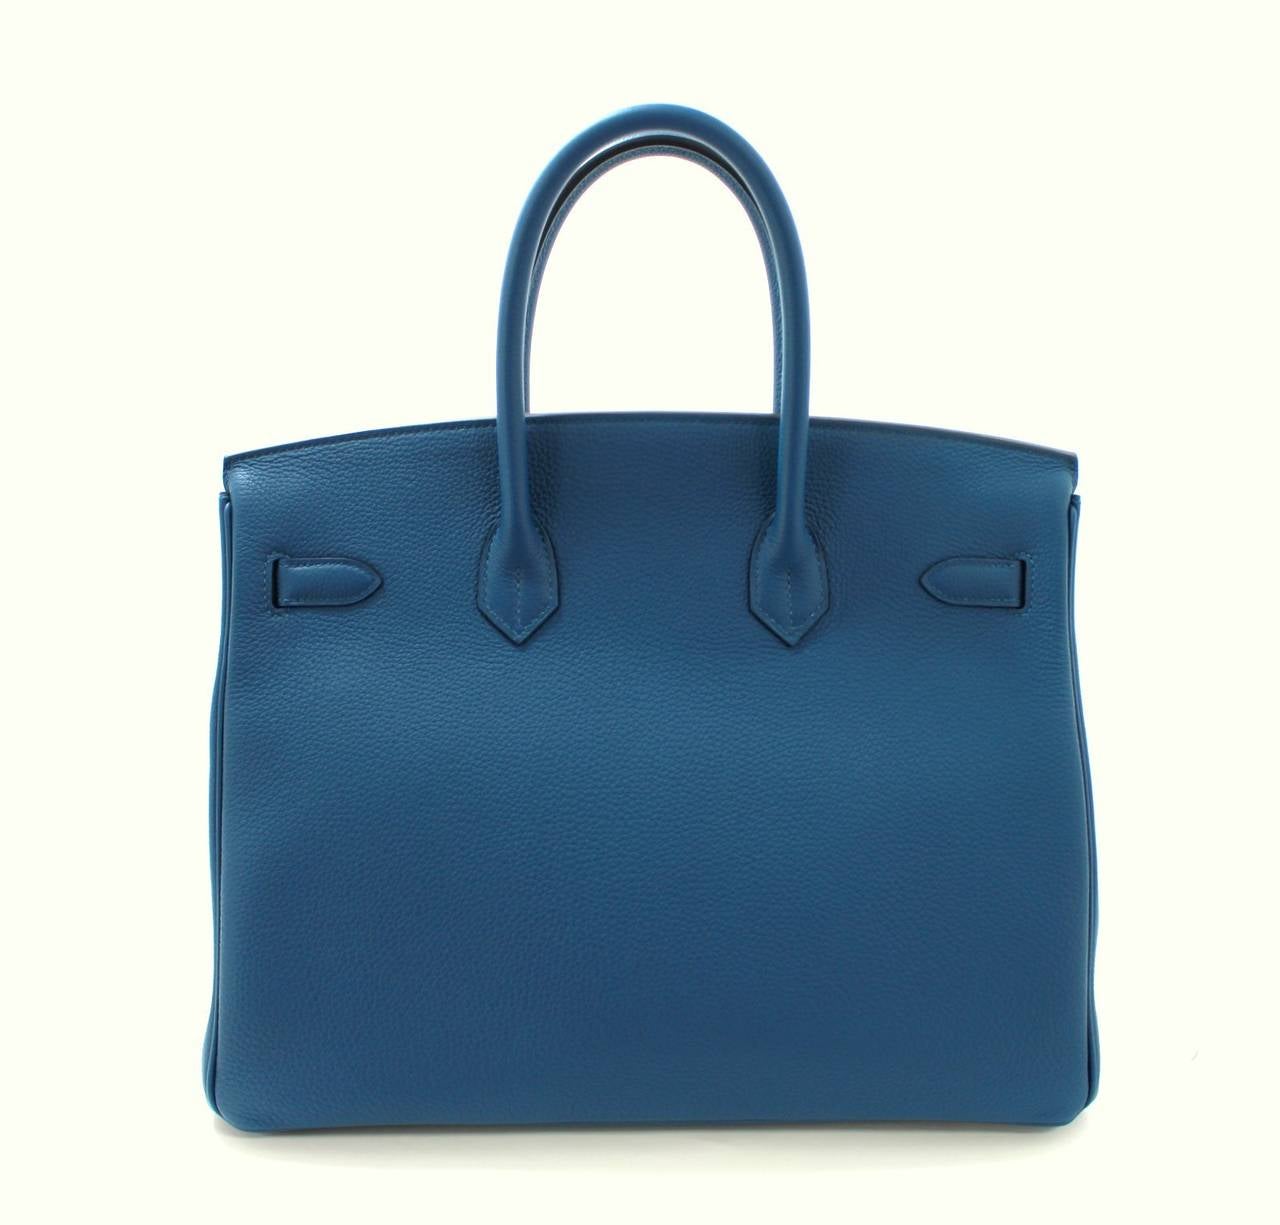 Pristine, store fresh condition (plastic on hardware) Hermès Birkin Bag in BLEU DE GALICE Togo Leather with Palladium, 35 cm size.   
Crafted by hand and considered by many as the epitome of luxury items, Birkins are in extremely high demand but